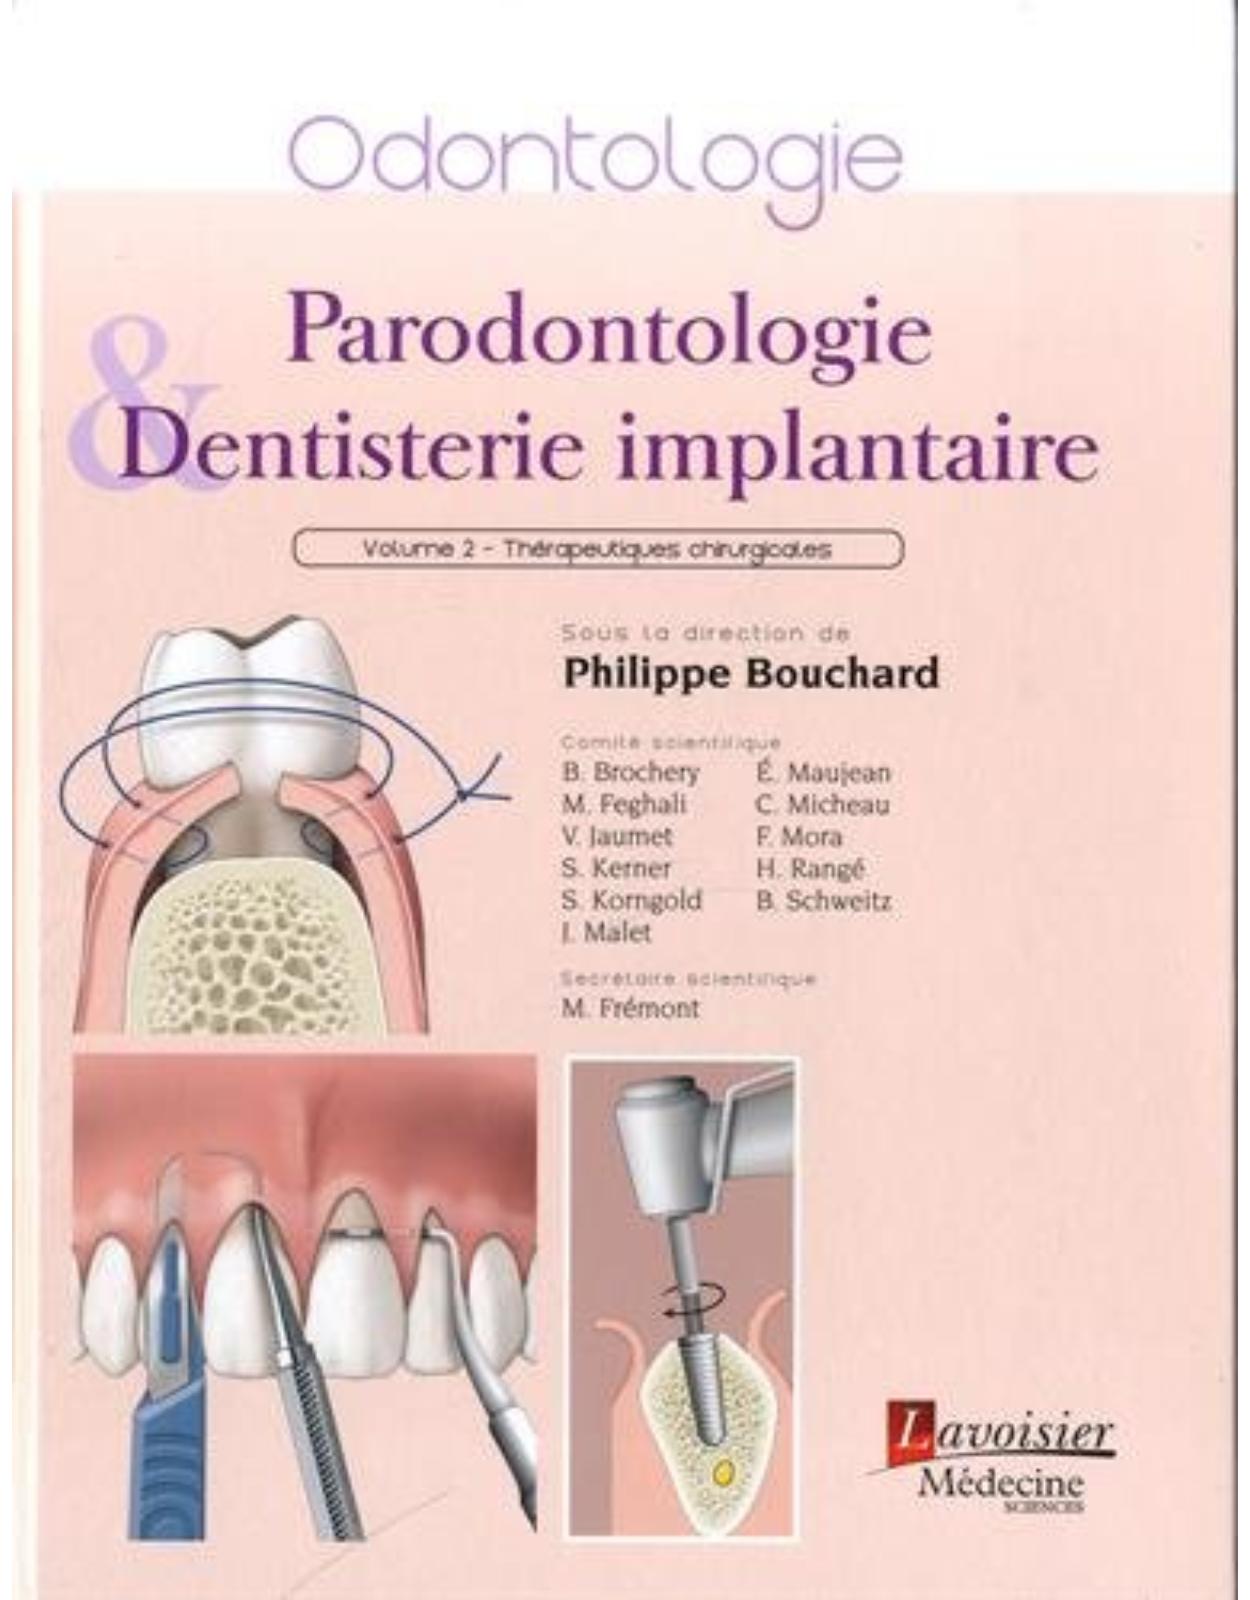 Parodontologie & dentisterie implantaire : Volume 2, Therapeutiques chirurgicales